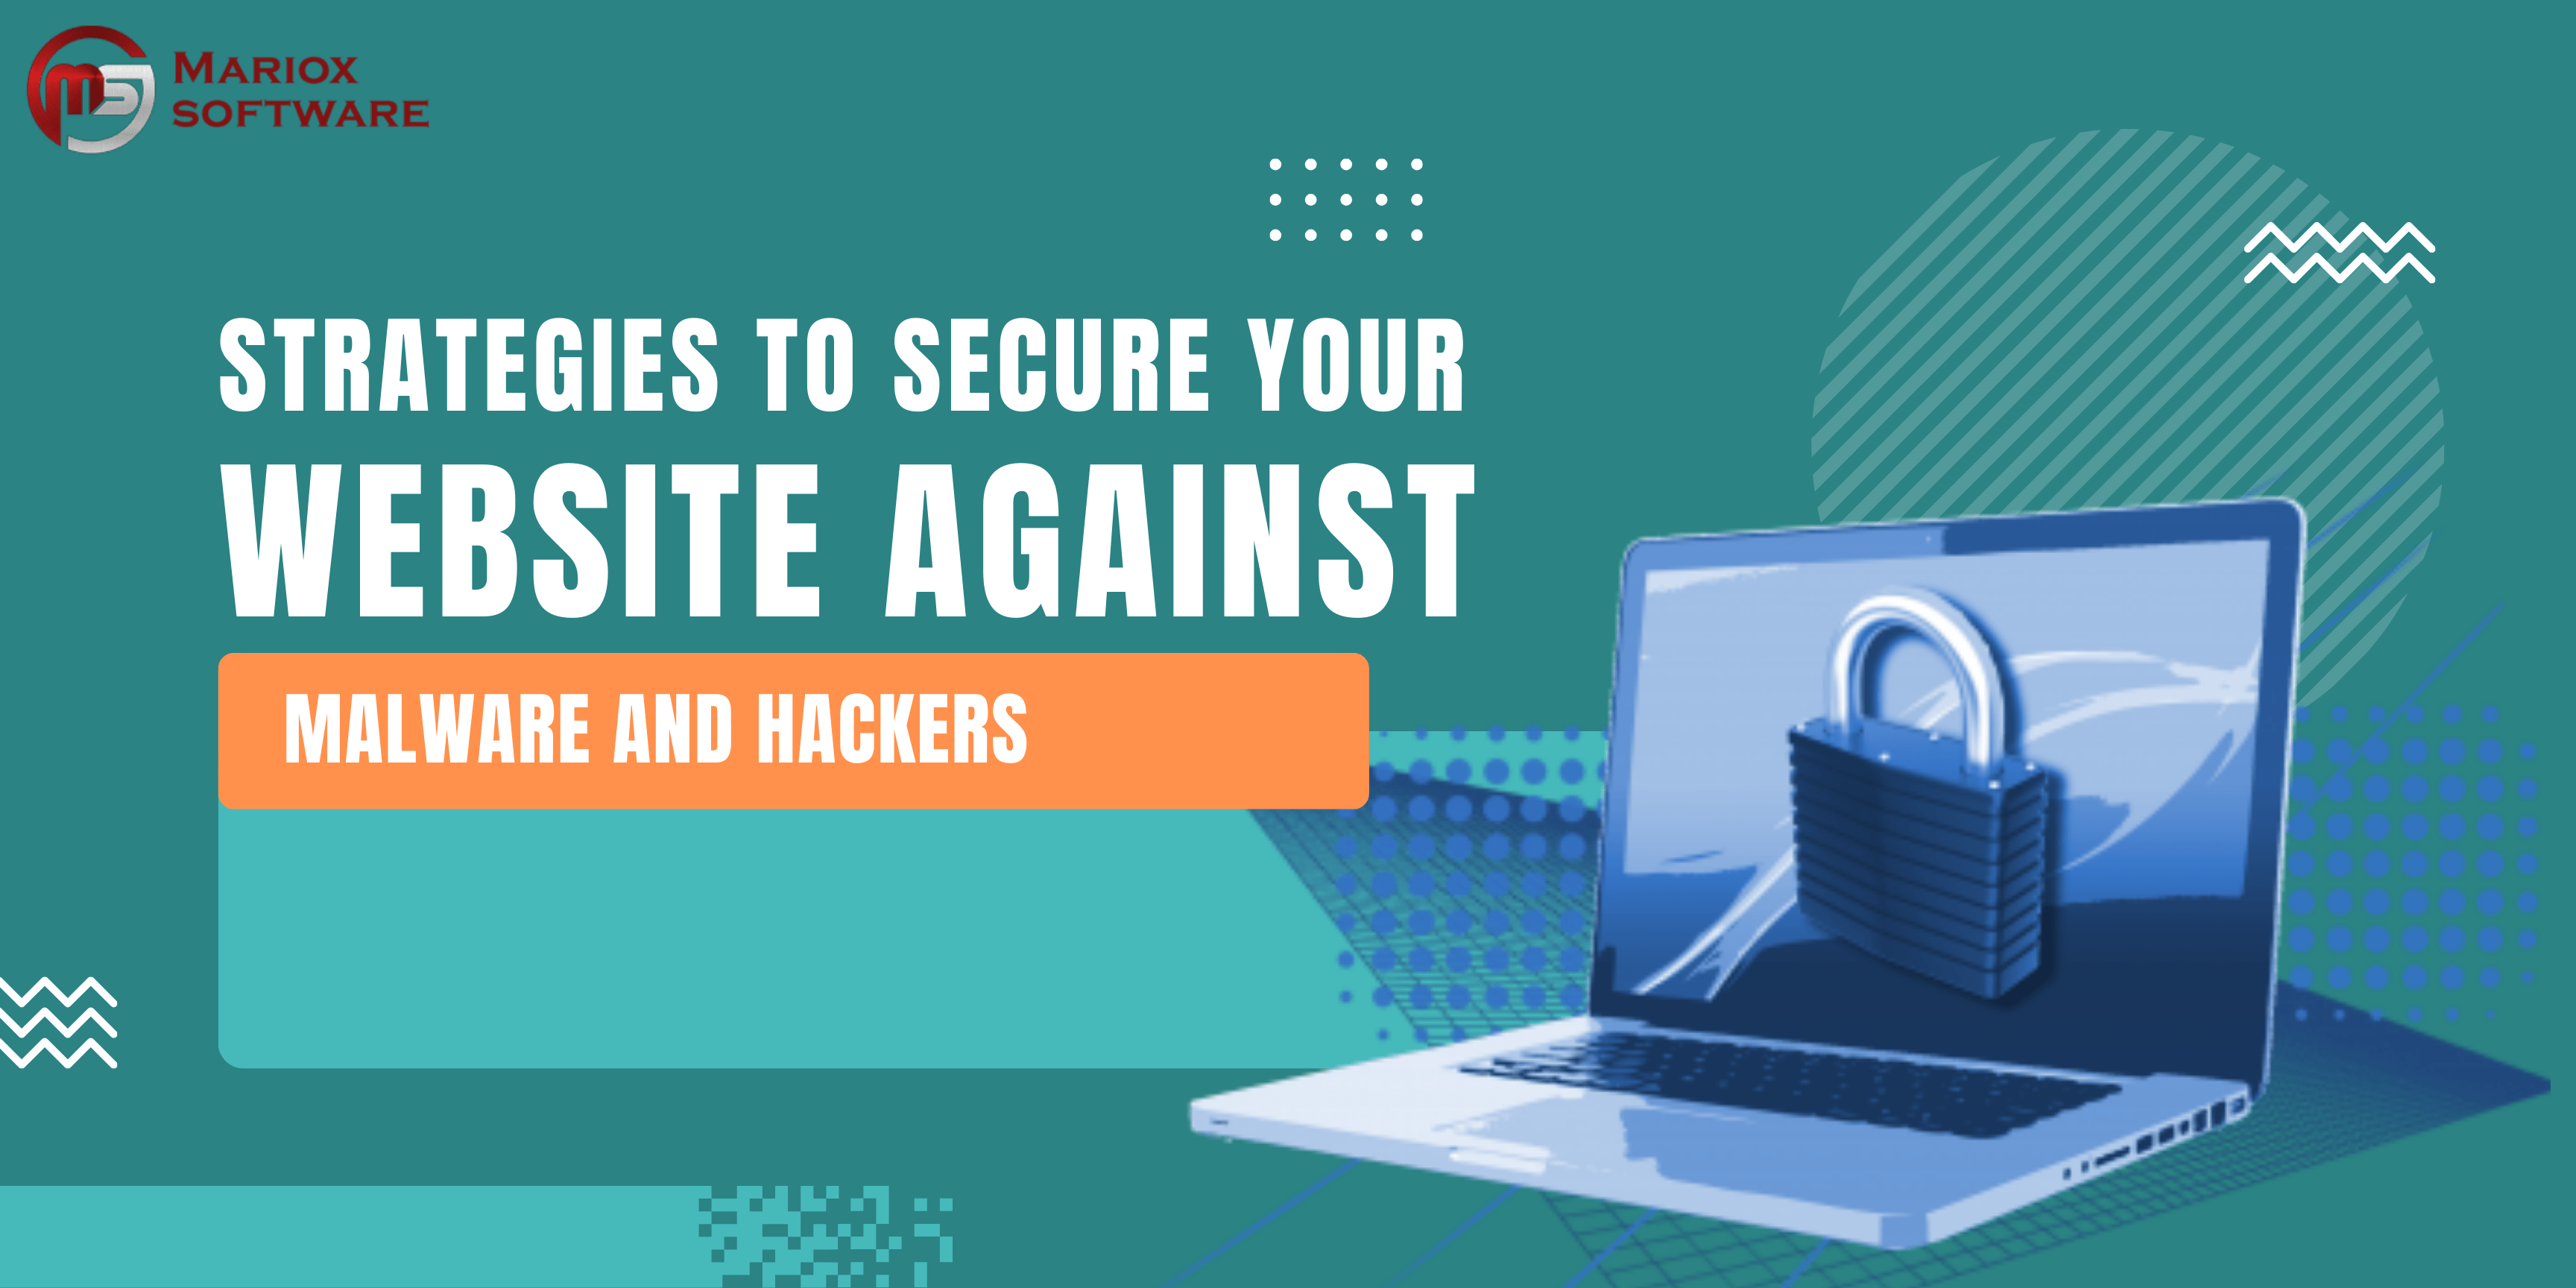 Strategies to Secure Your Website Against Malware And Hackers